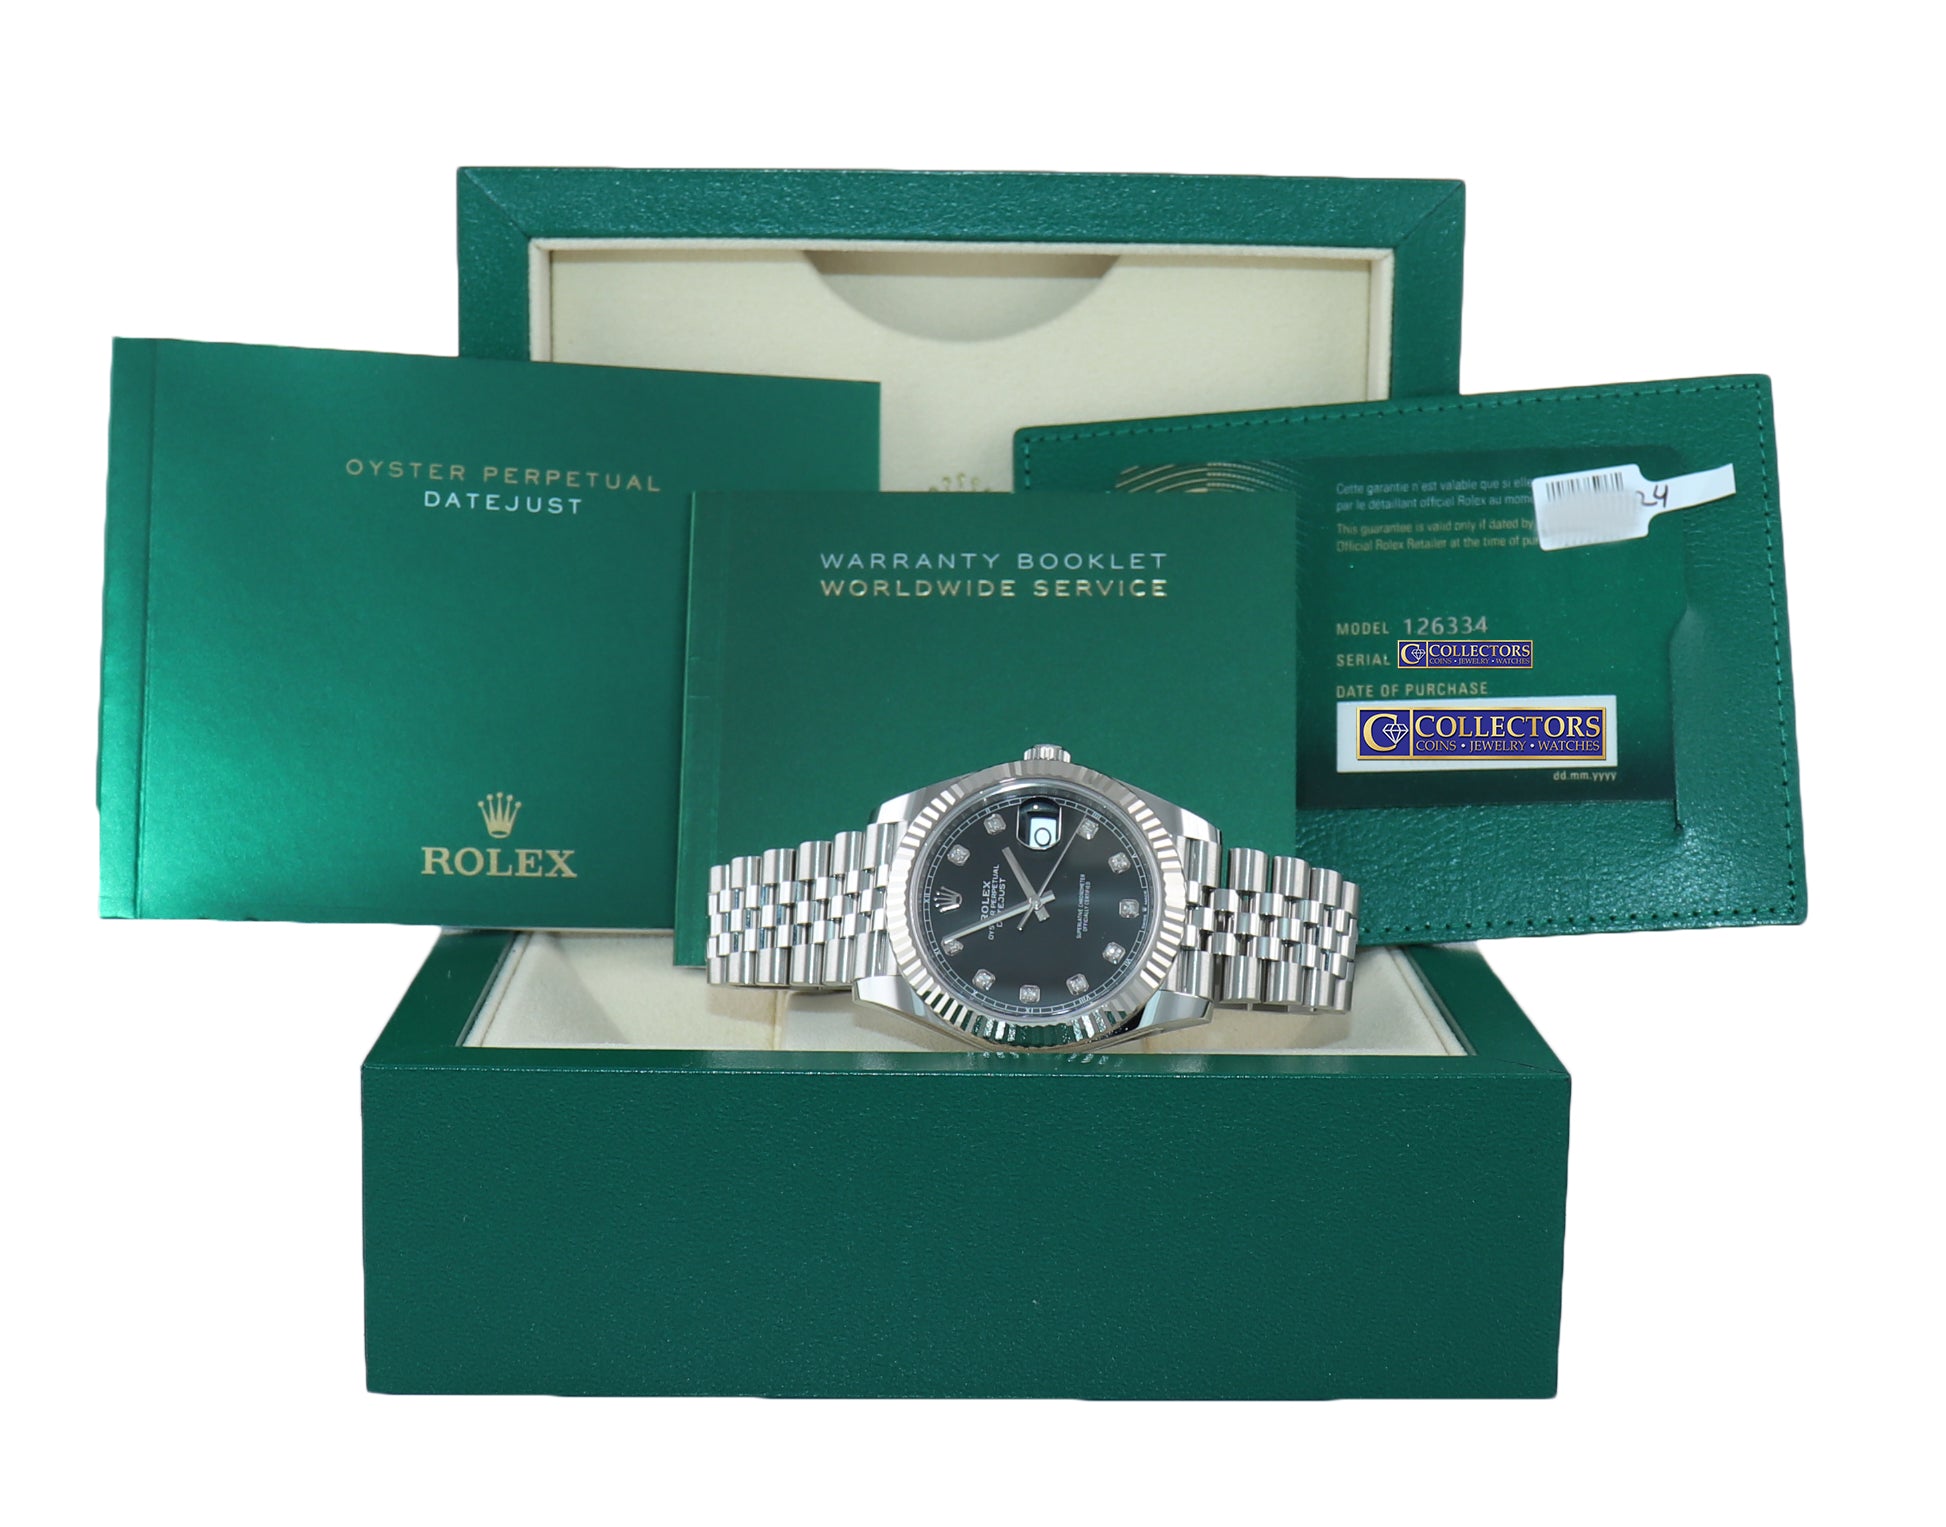 2021 NEW PAPERS Rolex DateJust 41 126334 Black Diamond Fluted Jubilee Watch Box